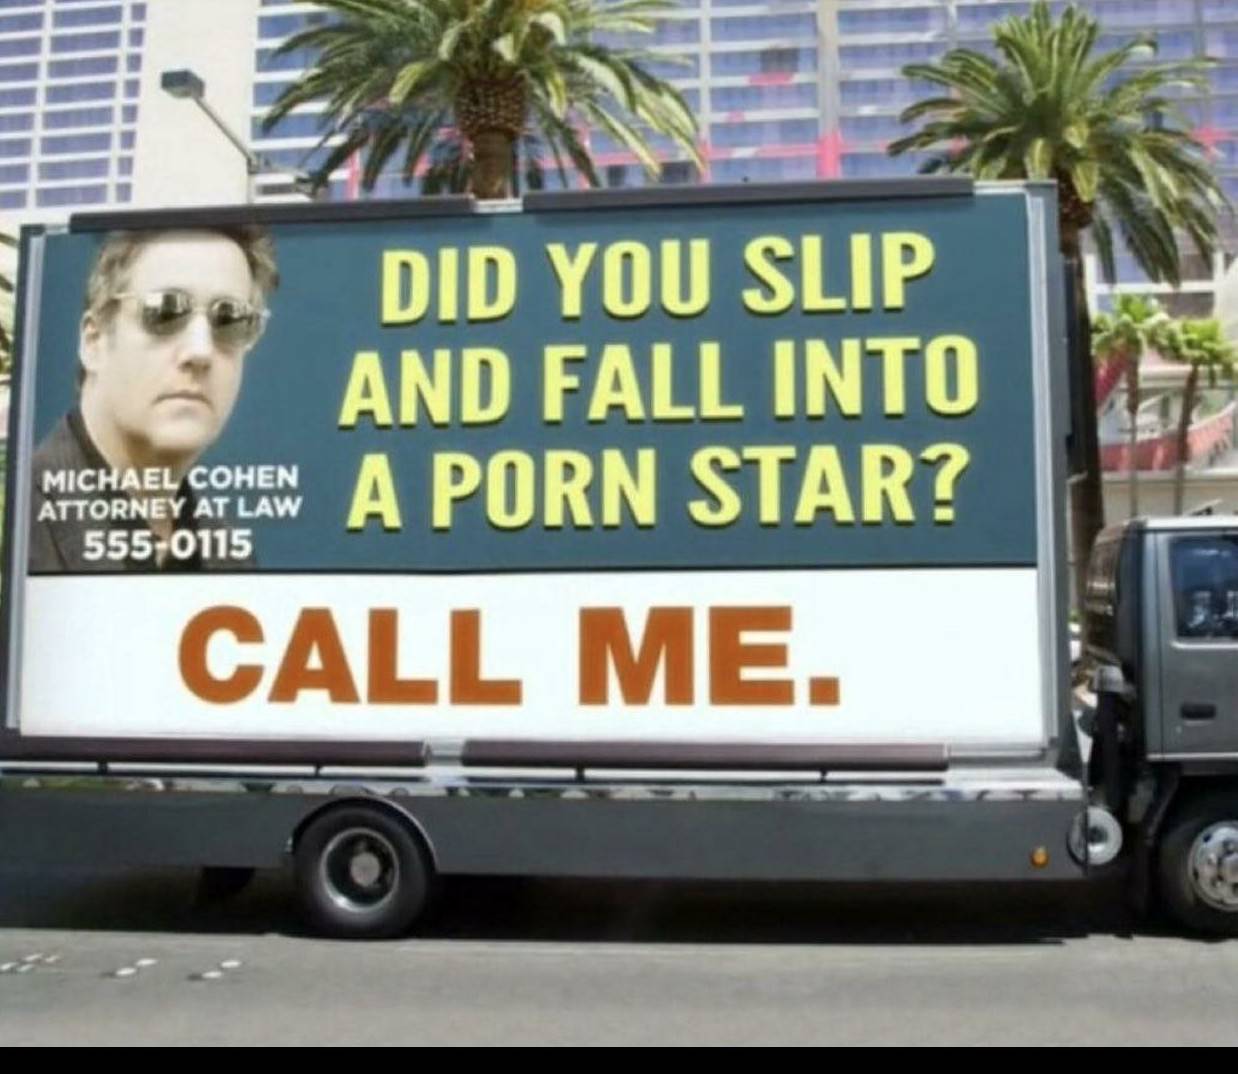 car - Iii Did You Slip And Fall Into Attorney Steam A Porn Star? Call Me. Michael Cohen Attorney At Law 5550115